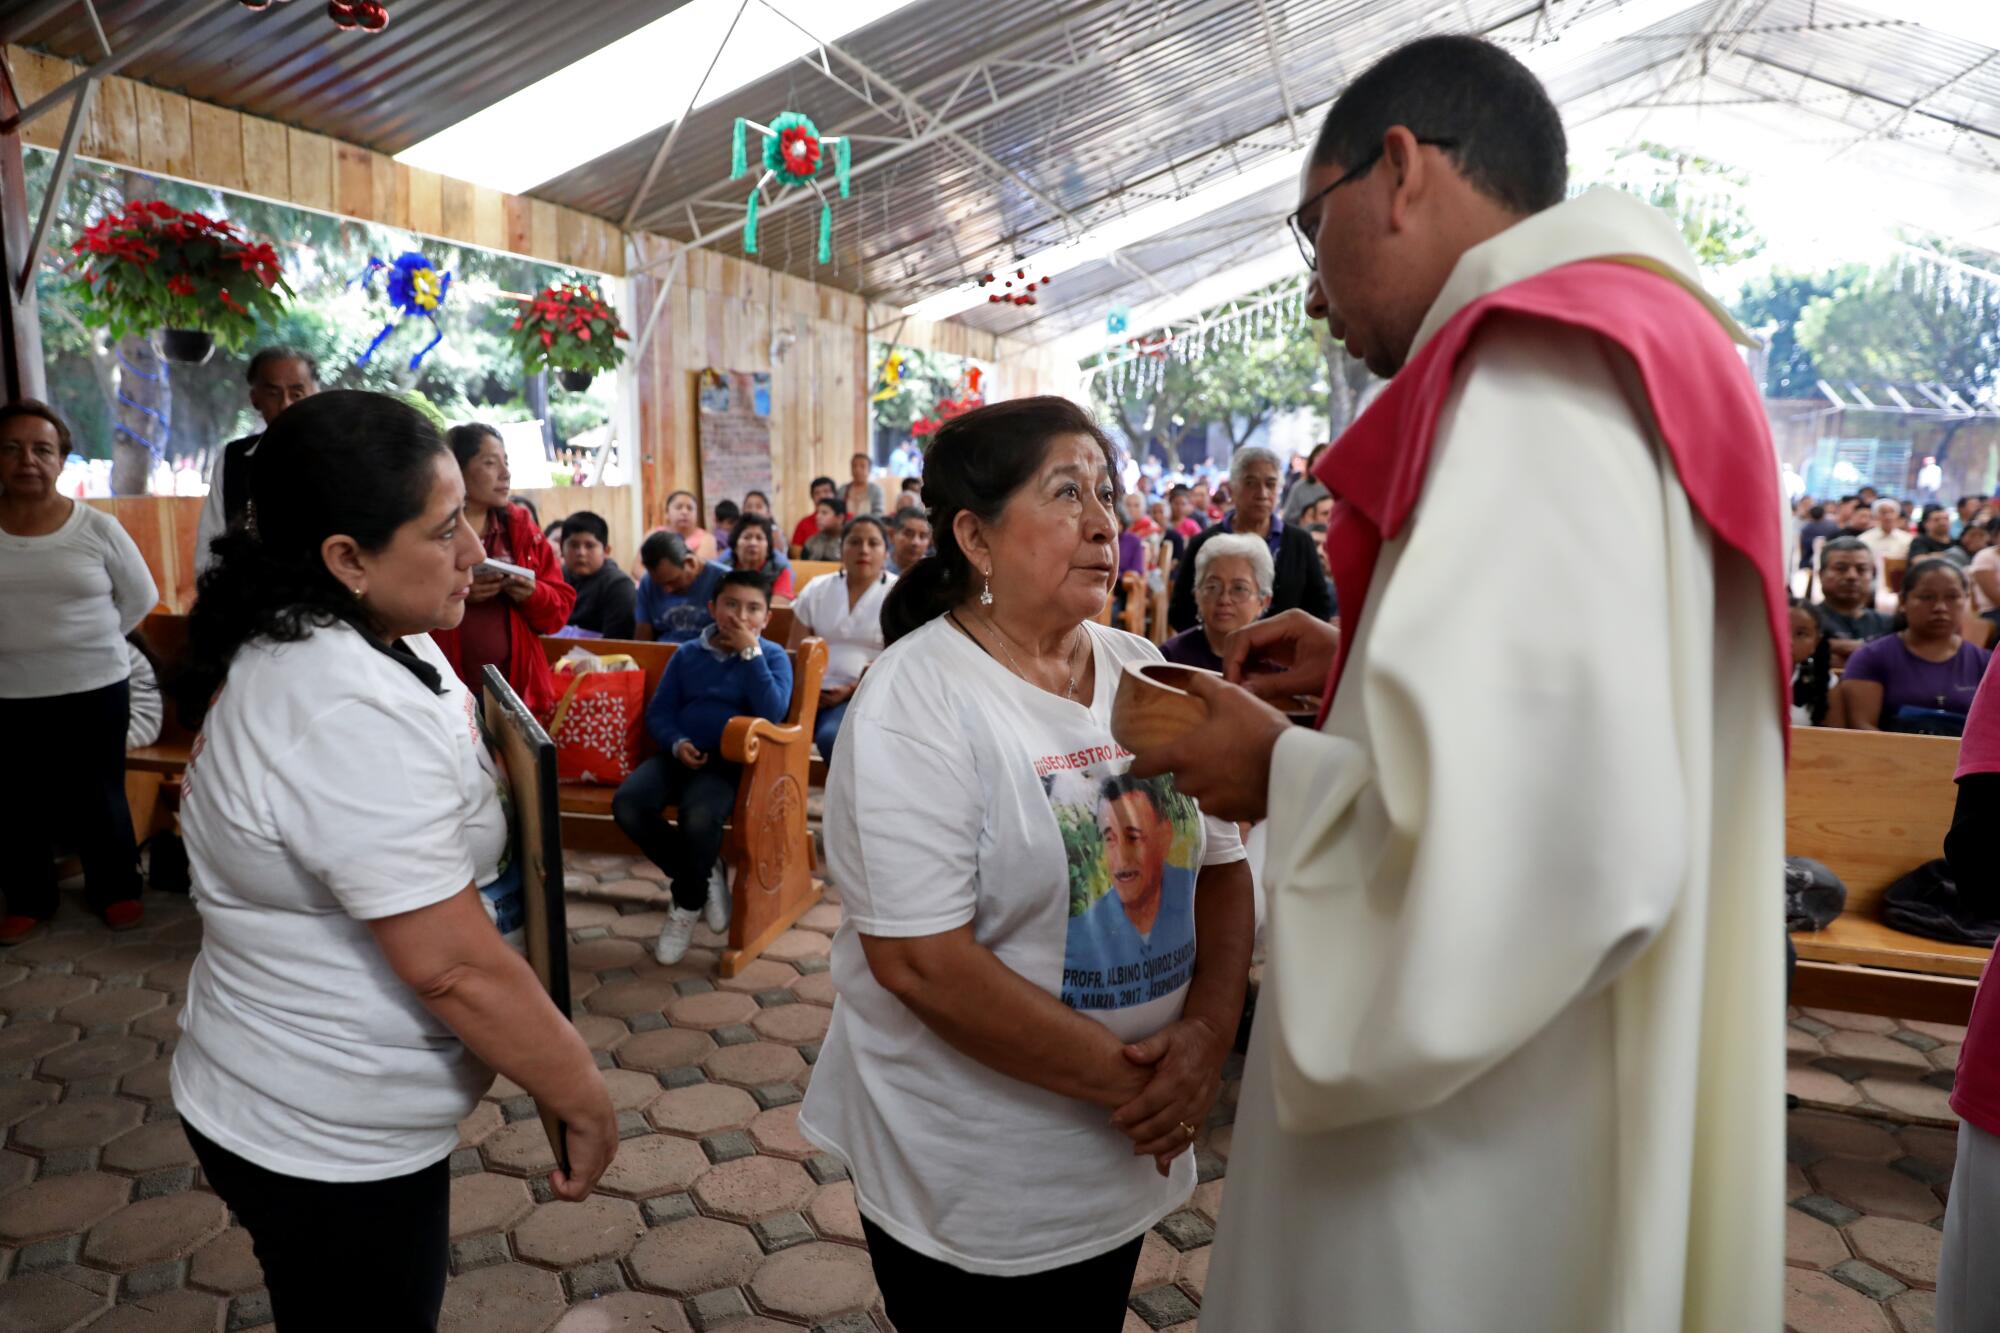 Maricela Pe?aloza Flores, center, with daughter Georgina Quiroz Pe?aloza, asks the priest if she can make an announcement about her husband in Tepoztlán, Mexico, on Dec. 15.